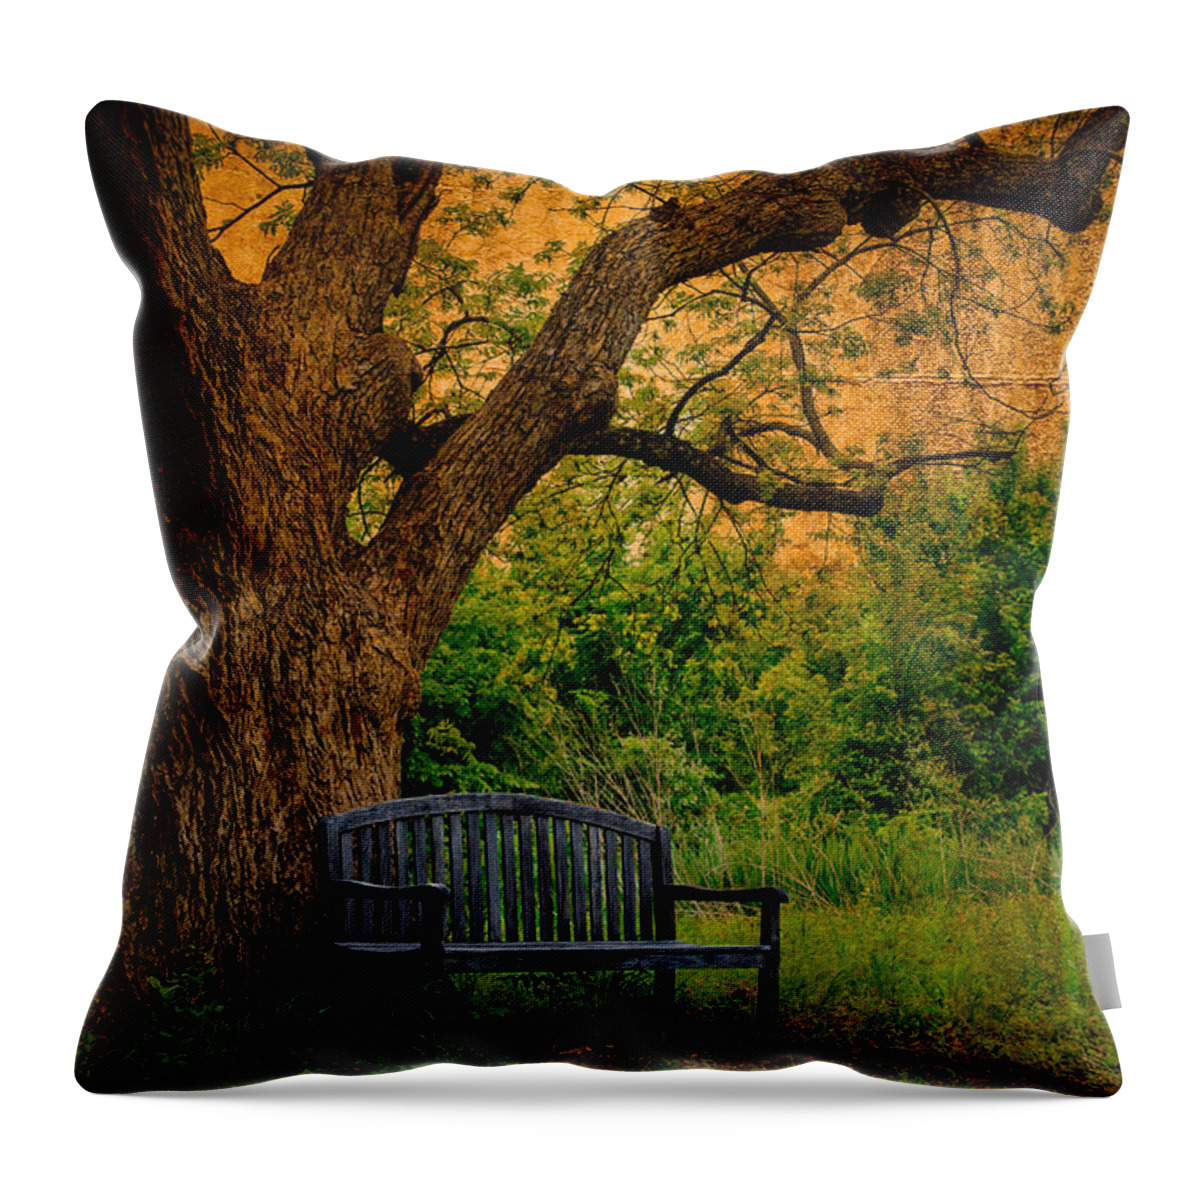 Art Throw Pillow featuring the photograph S O L I T U D E by Charles Dobbs